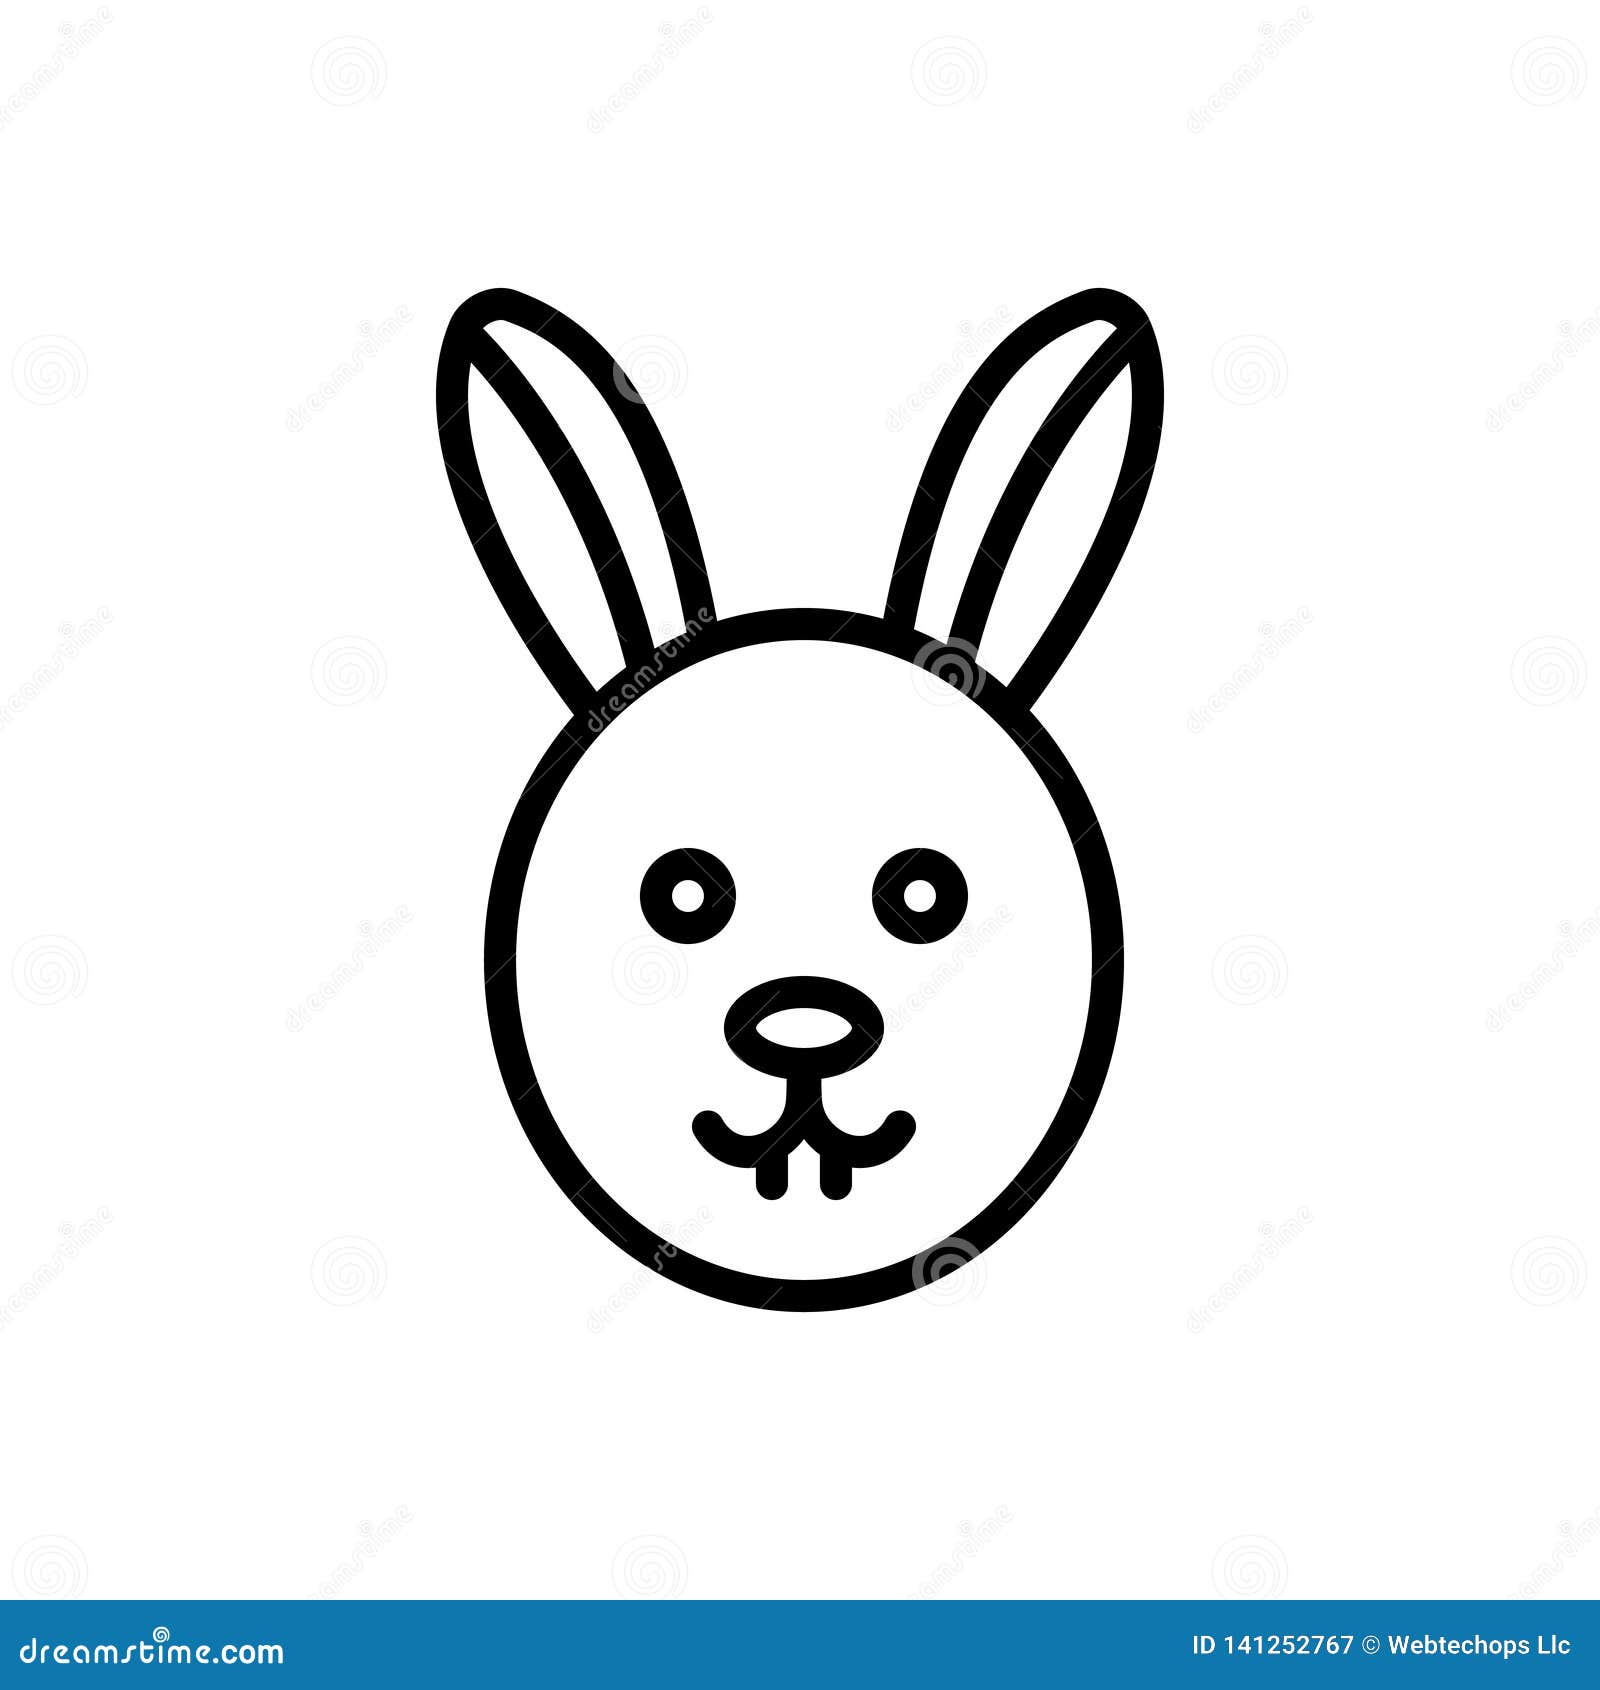 black line icon for rabbit, animal and face